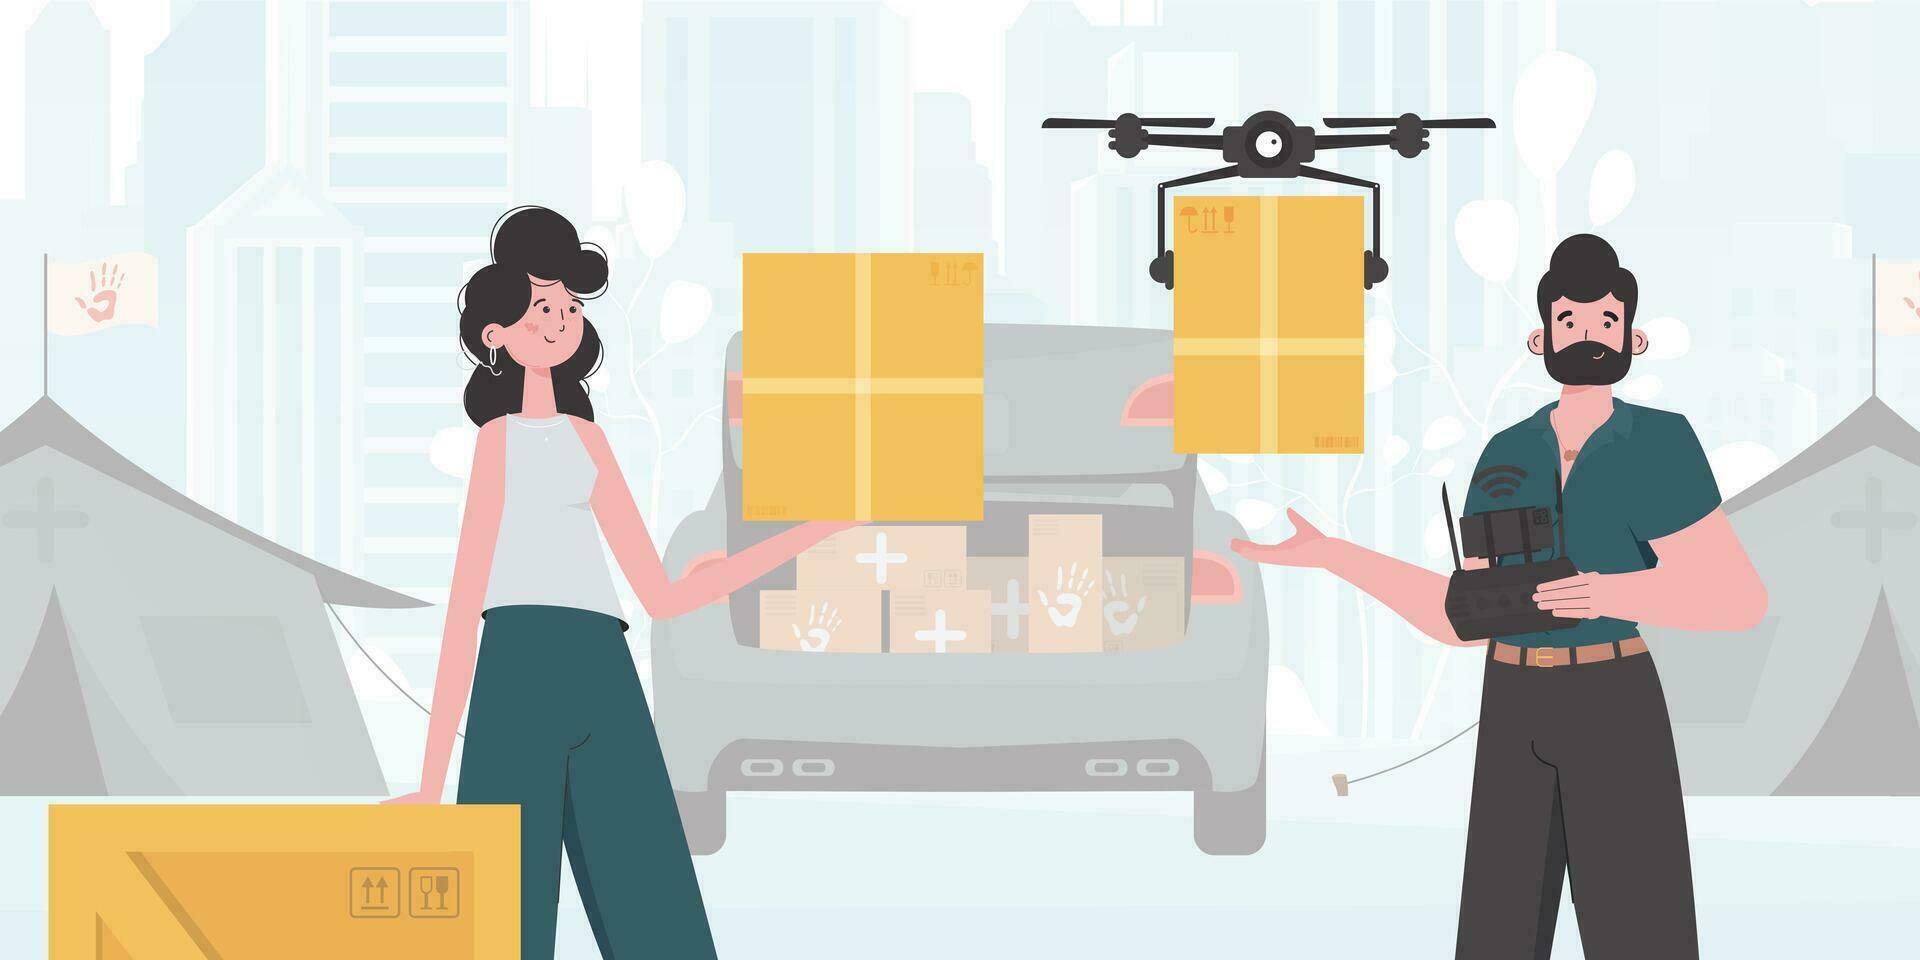 Camp for humanitarian aid. The drone is transporting the parcel. Man and woman with cardboard boxes. Vector illustration.